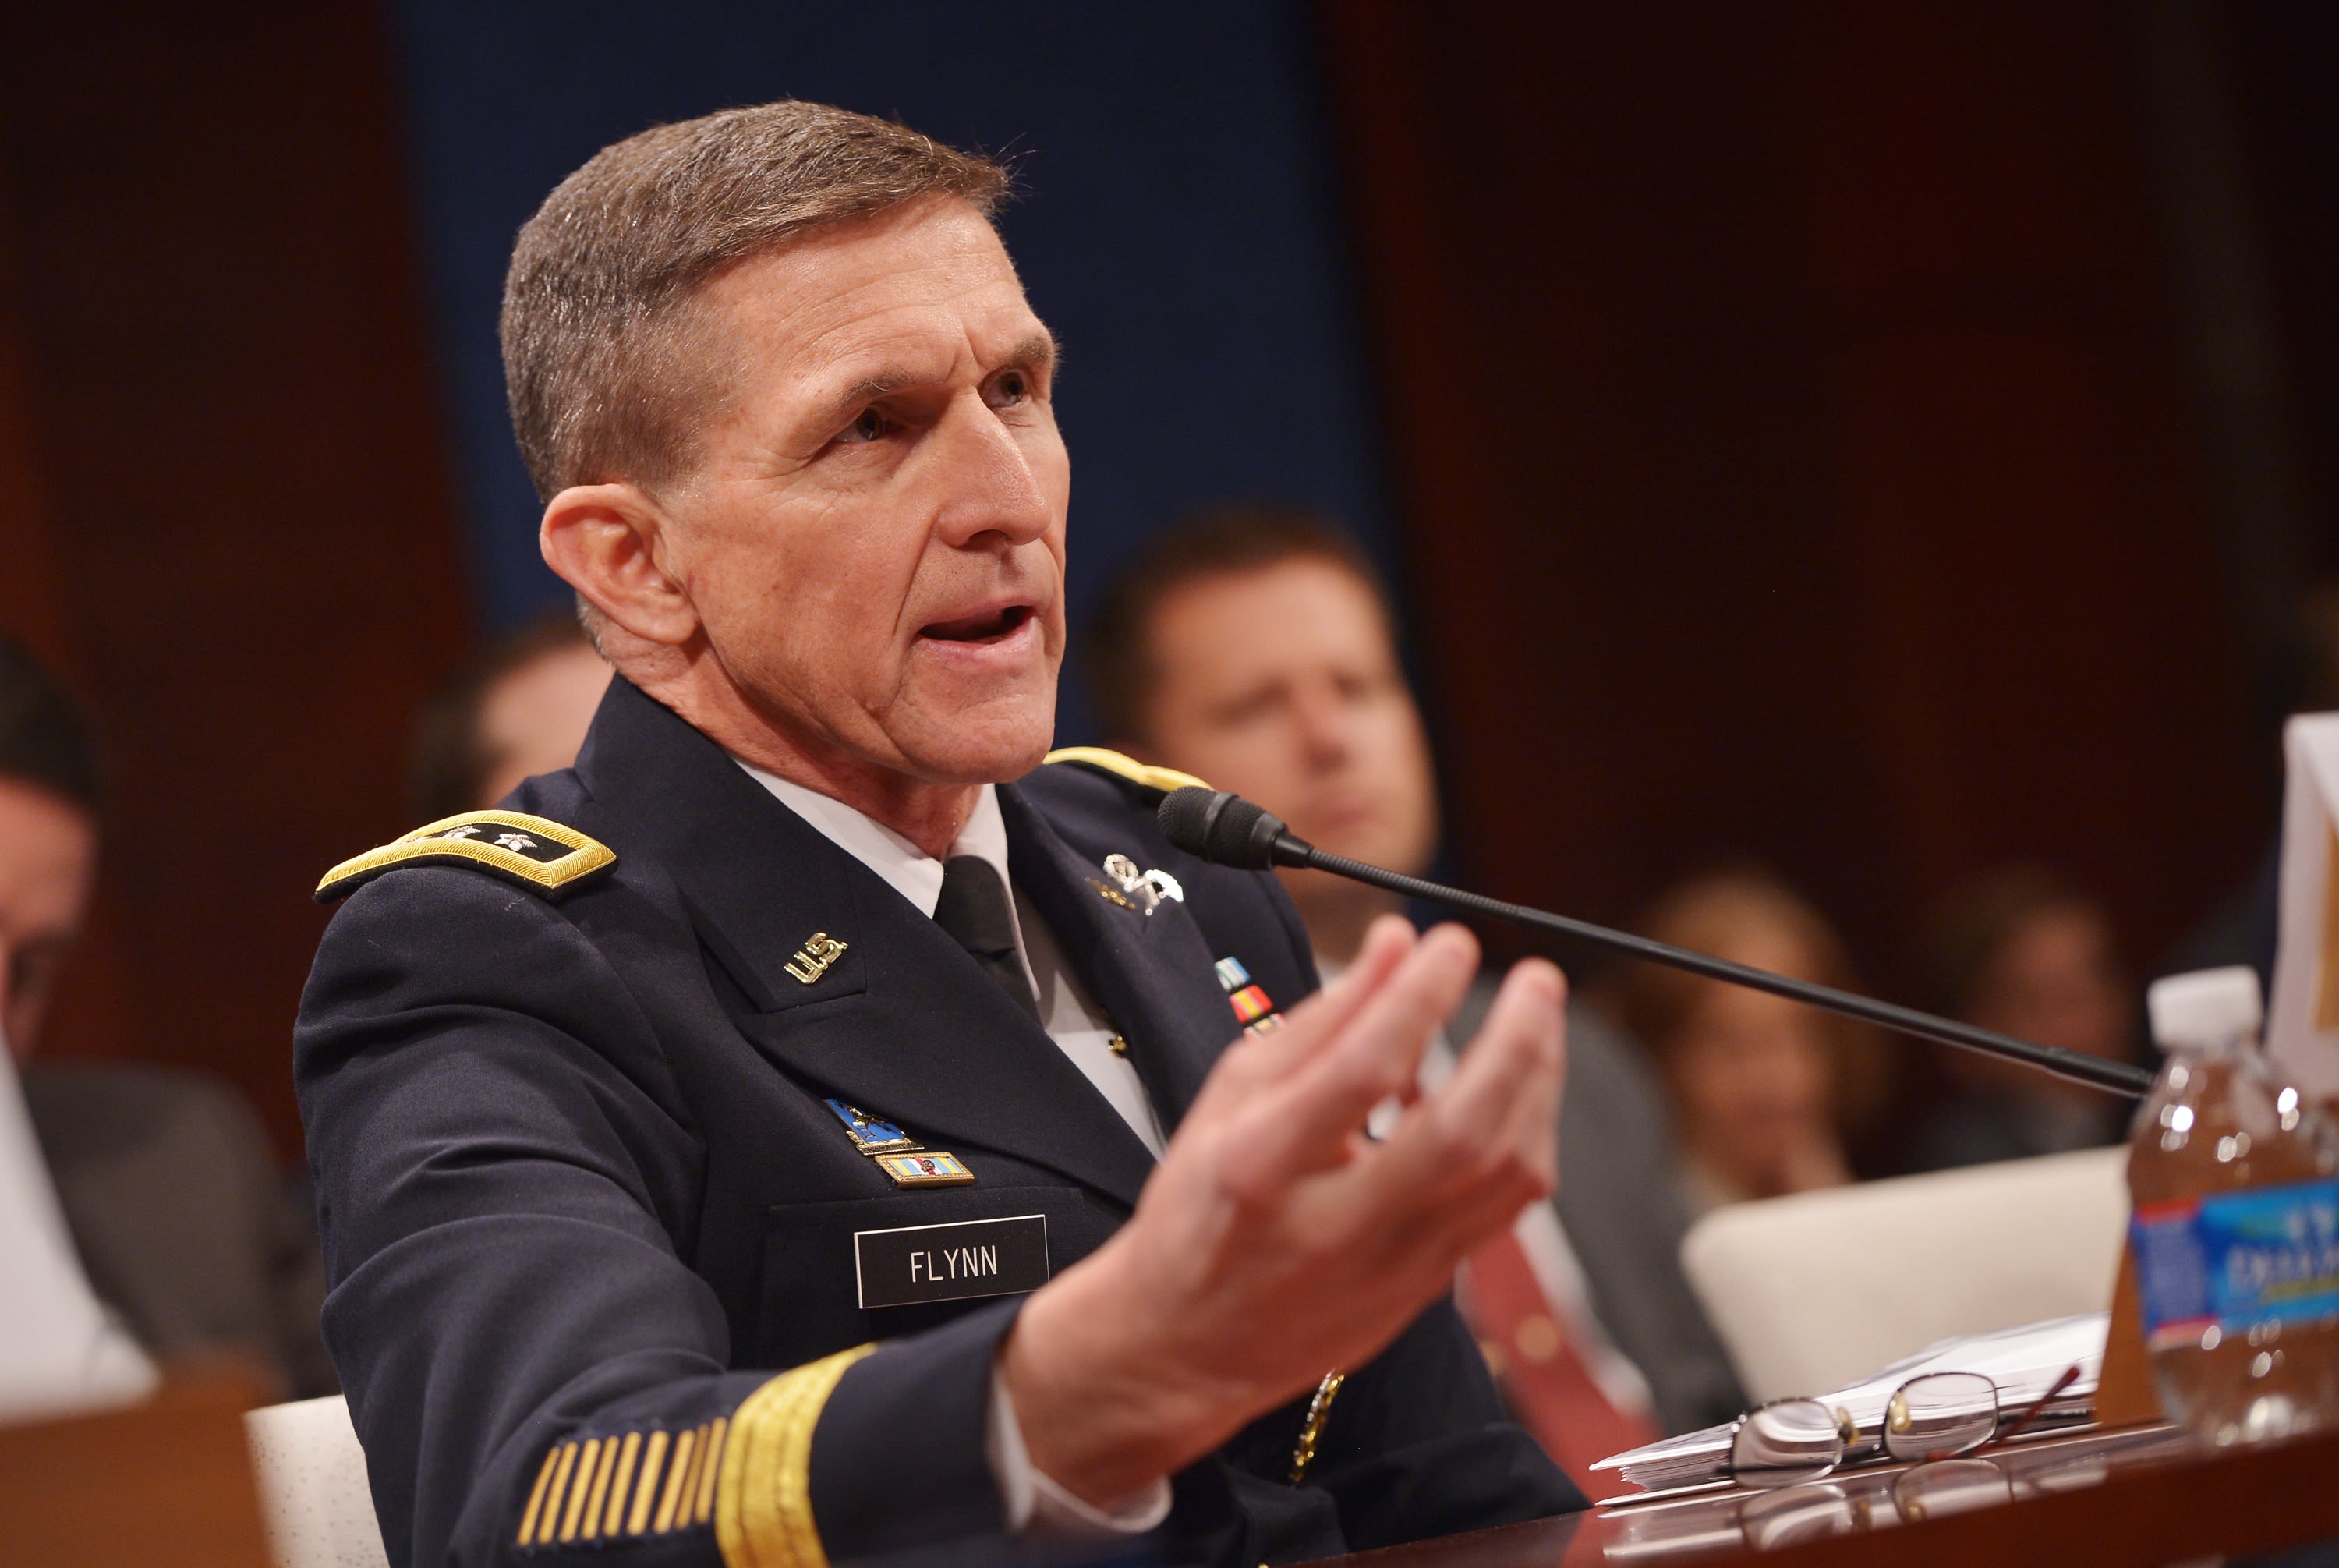 14 Facts About Michael Flynn